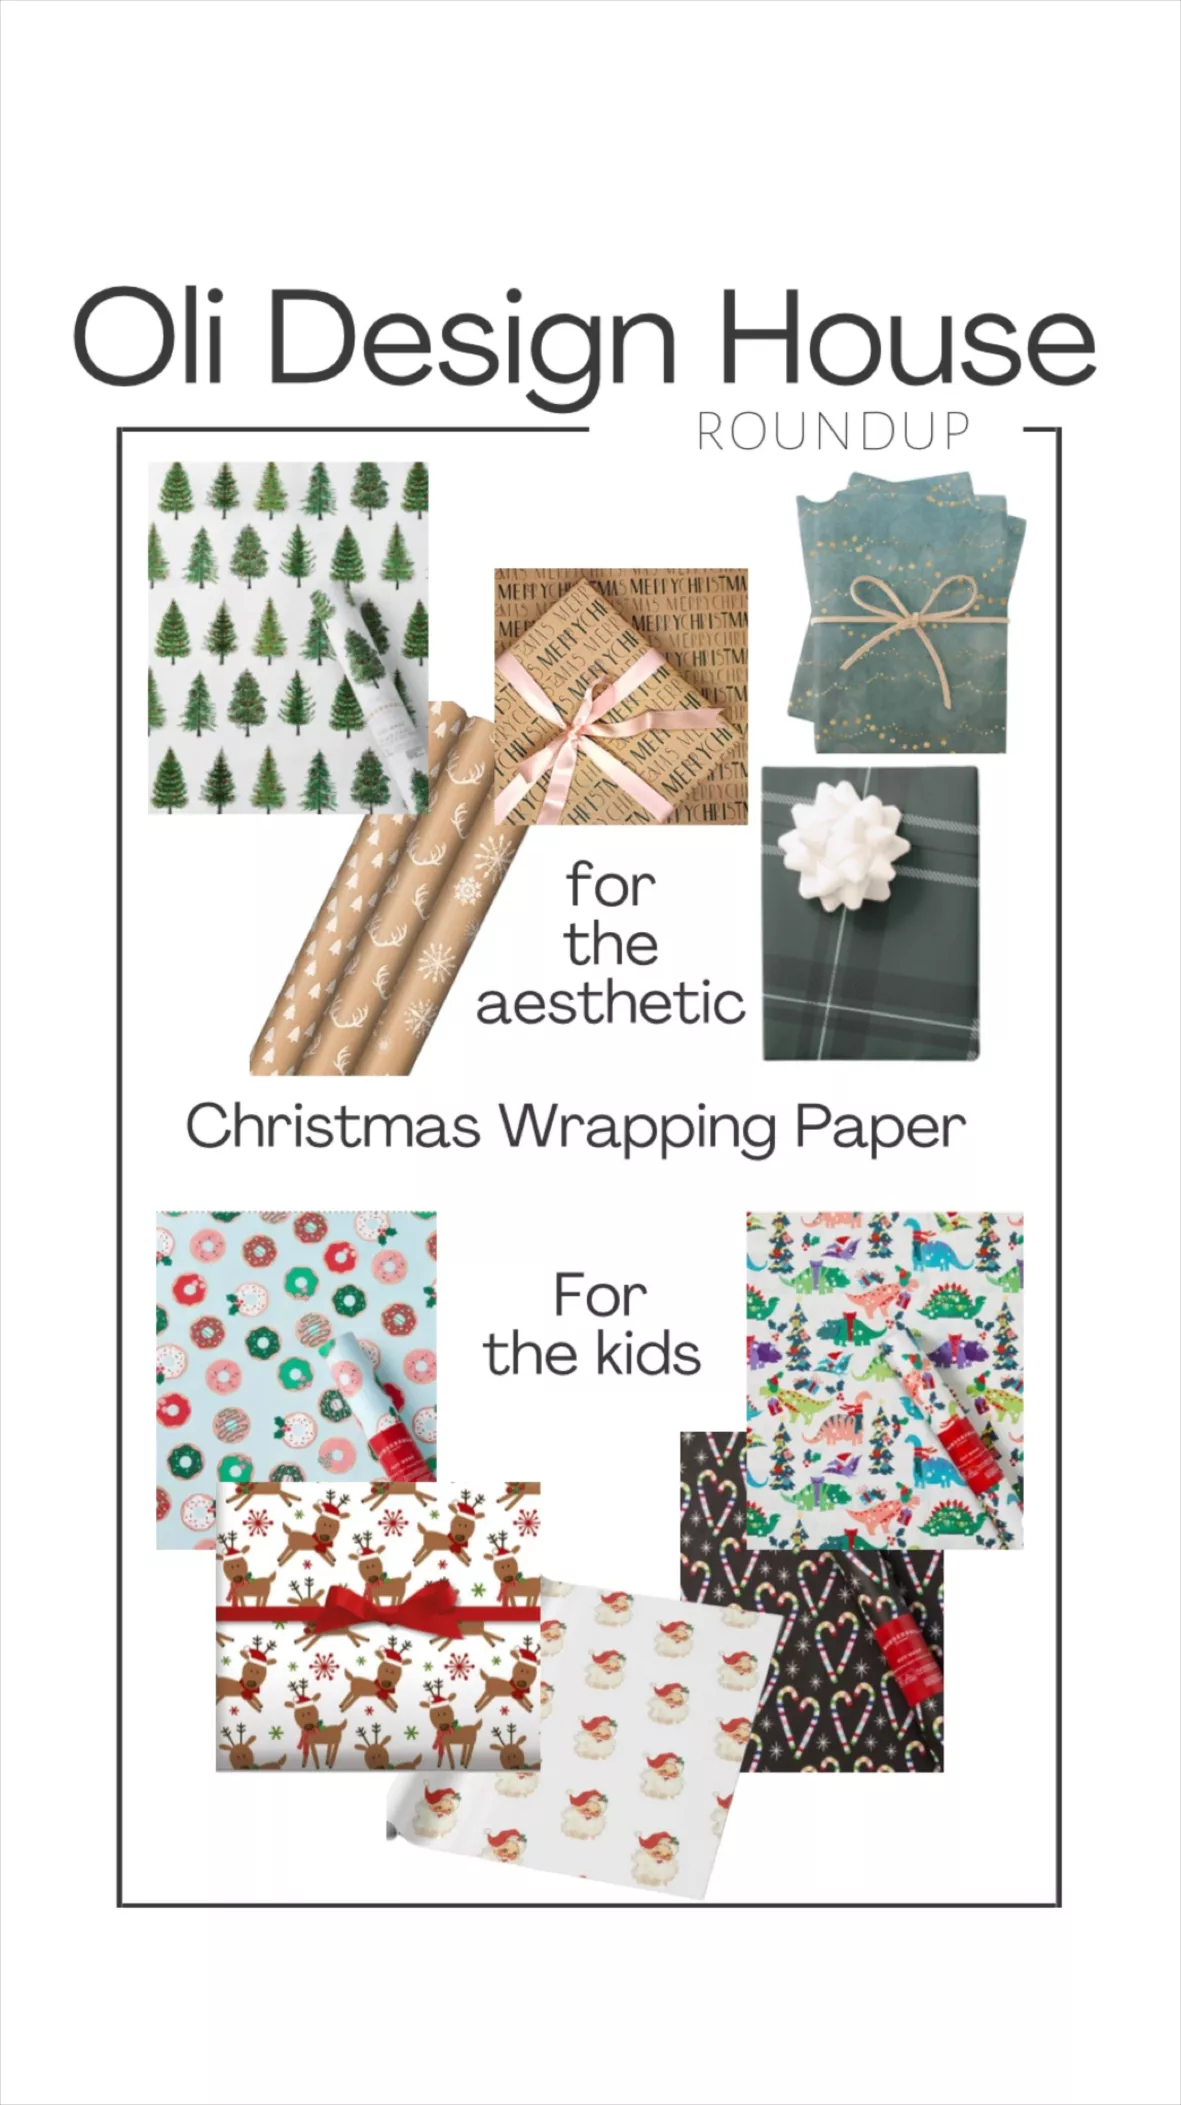 We have a fun selection of holiday wrap, including traditional